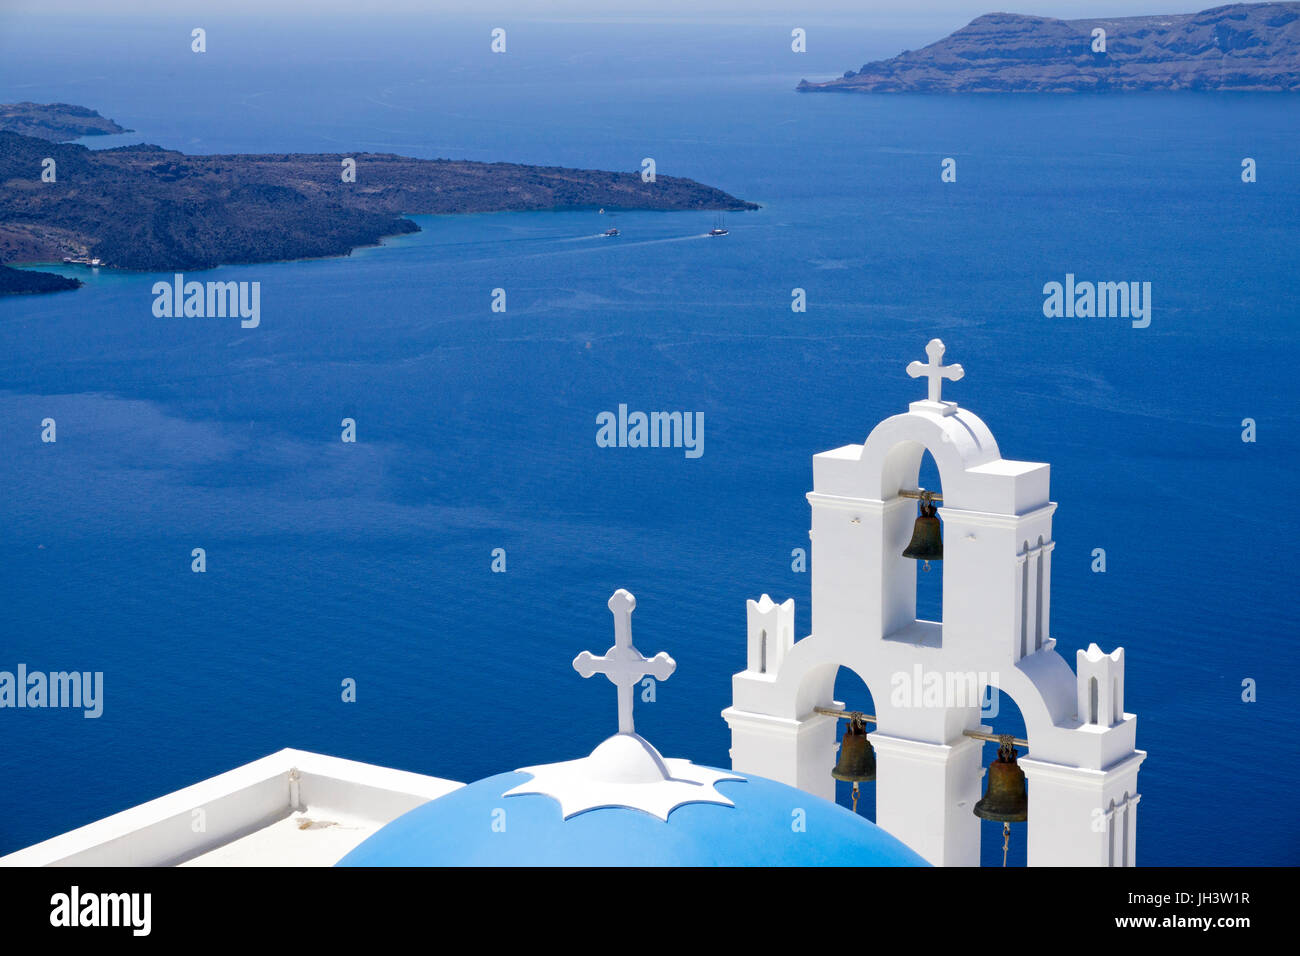 Orthodox church with bell tower at the crater edge, Firofestani, Thira, view on volcanic island Nea Kameni, Santorin, Cyclades, Aegean, Greece Stock Photo